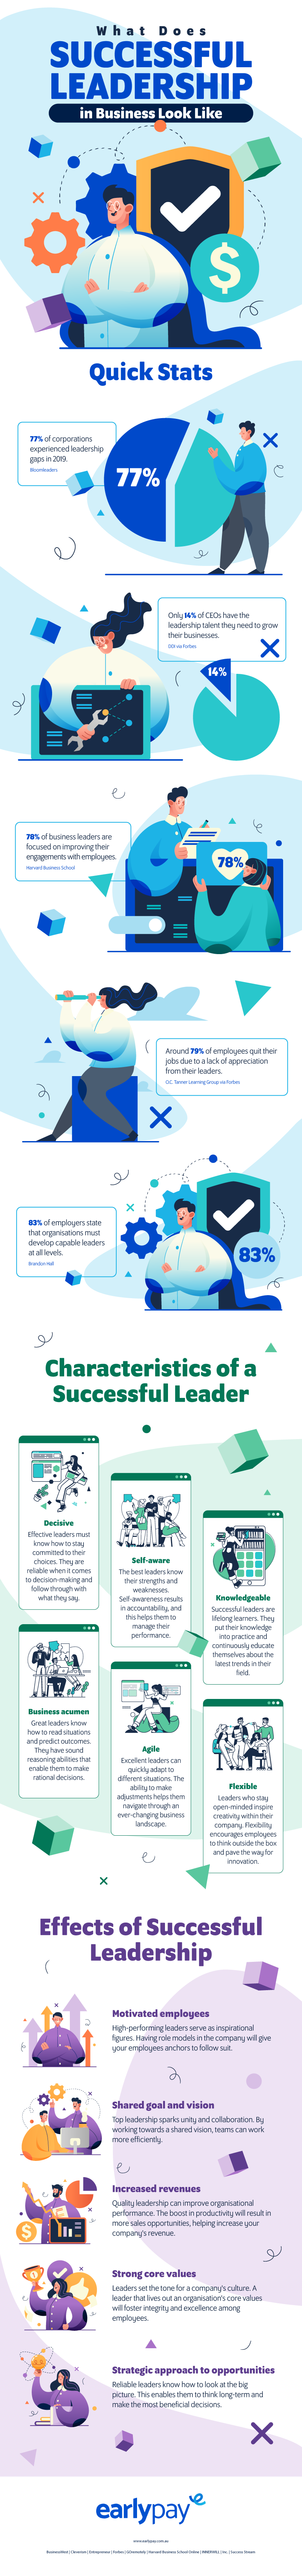 What Does Successful Leadership in Business Look Like